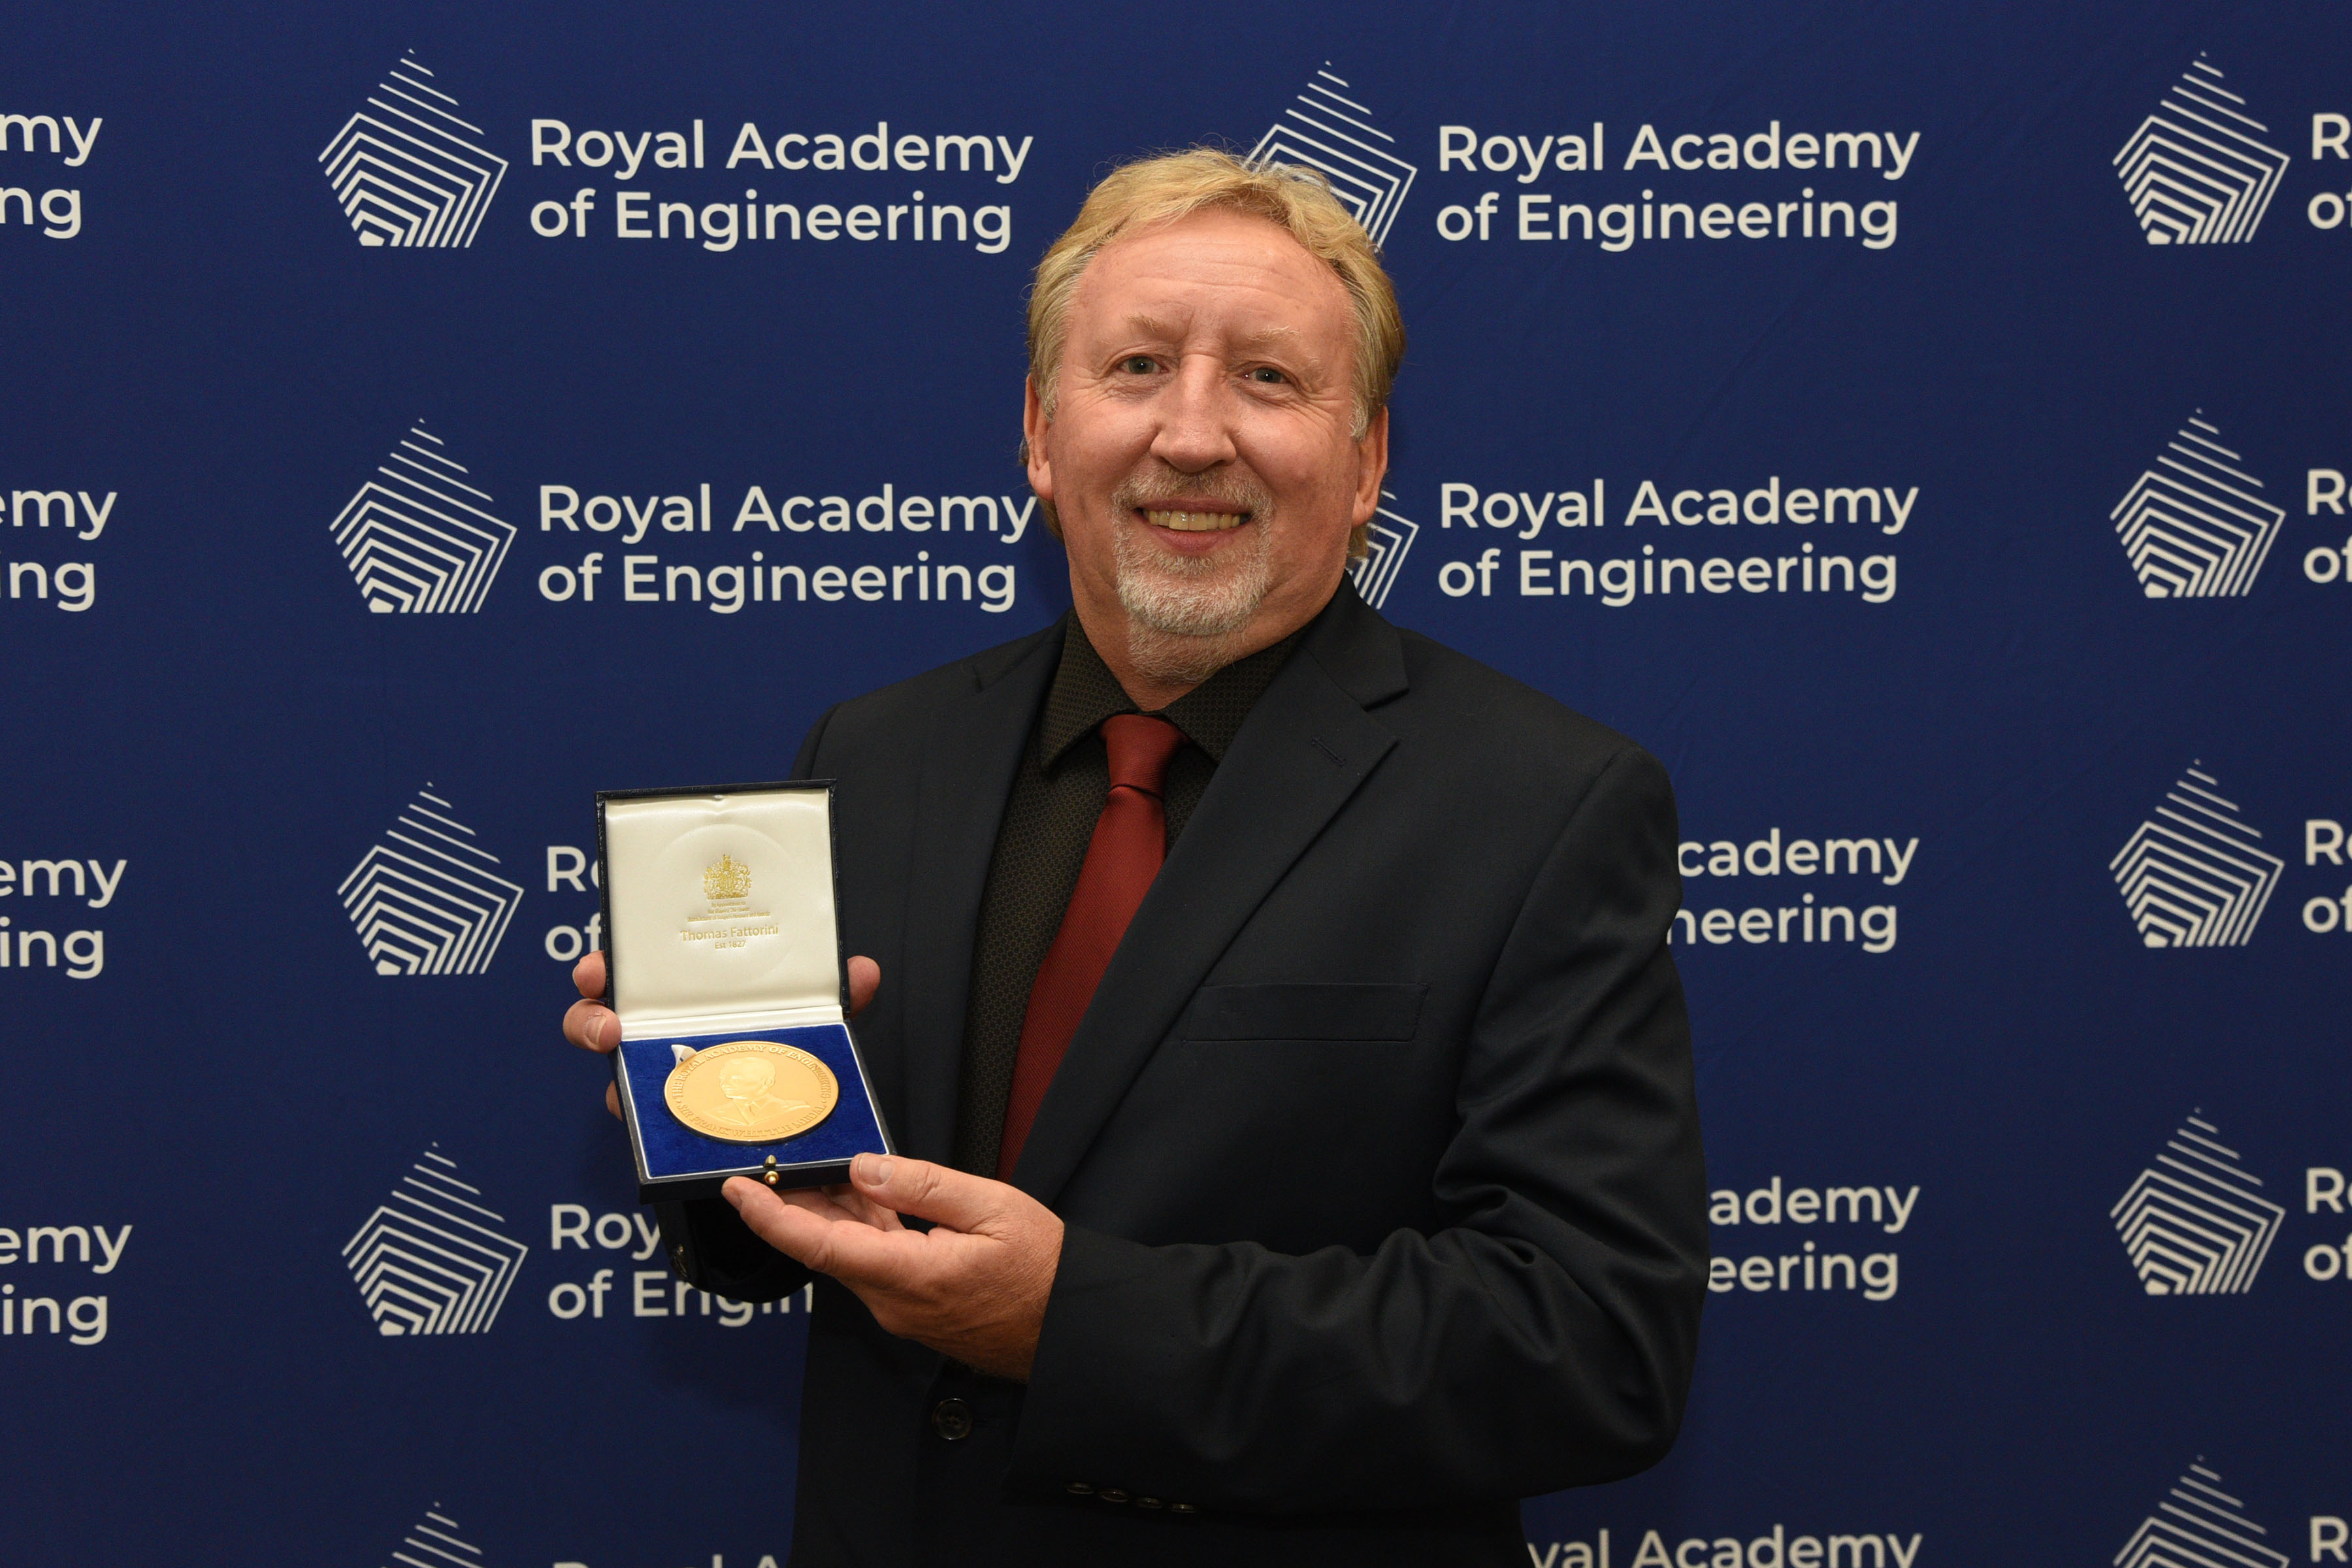 Professor Graham Reed FREng holding his Sir Frank Whittle Medal in front of a blue screen with the Royal Academy of Engineering logo